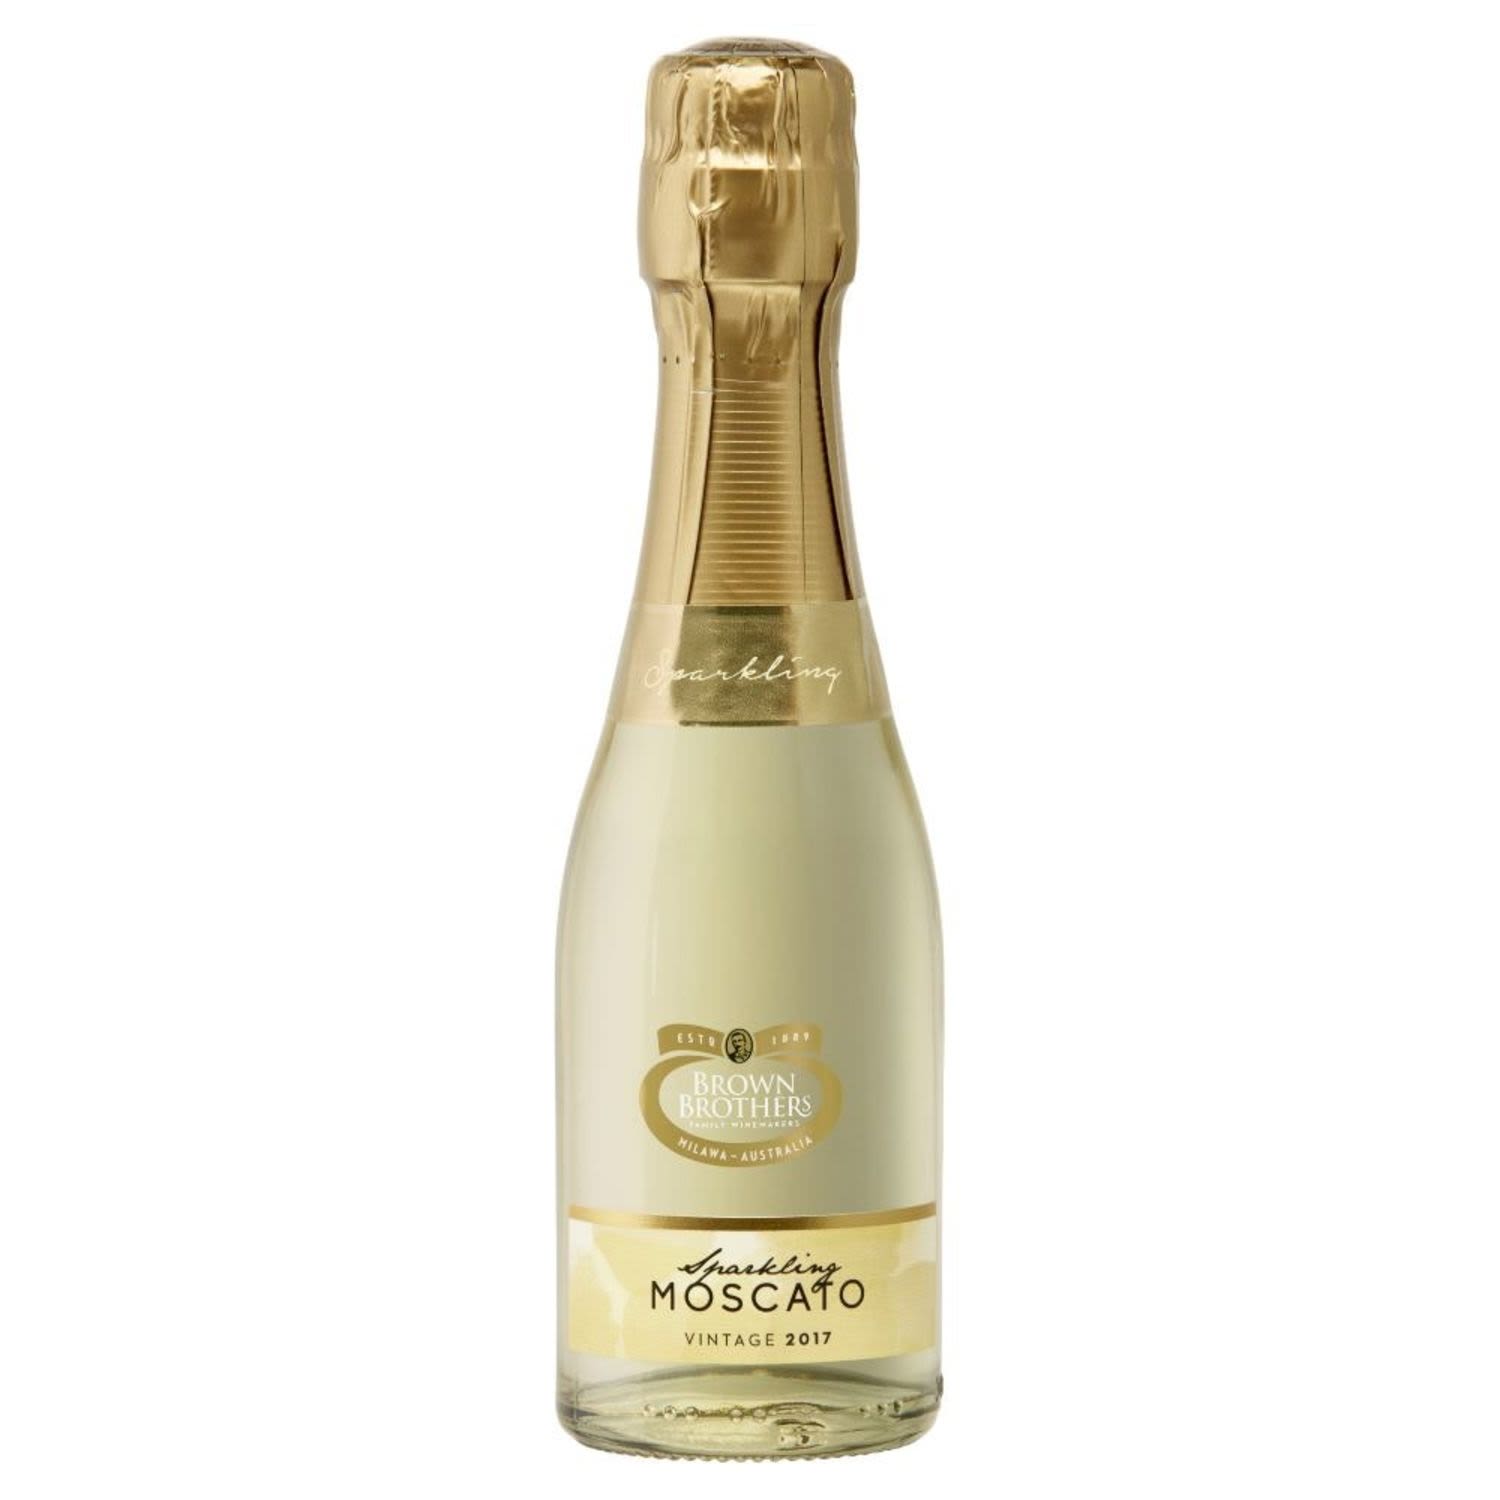 Beautifully fresh with a soft musk aroma and a delicate sparkling finish. Enjoy chilled.<br /> <br />Alcohol Volume: 6.50%<br /><br />Pack Format: Bottle<br /><br />Standard Drinks: 1</br /><br />Pack Type: Bottle<br /><br />Country of Origin: Australia<br /><br />Region: South Eastern Australia<br /><br />Vintage: Vintages Vary<br />